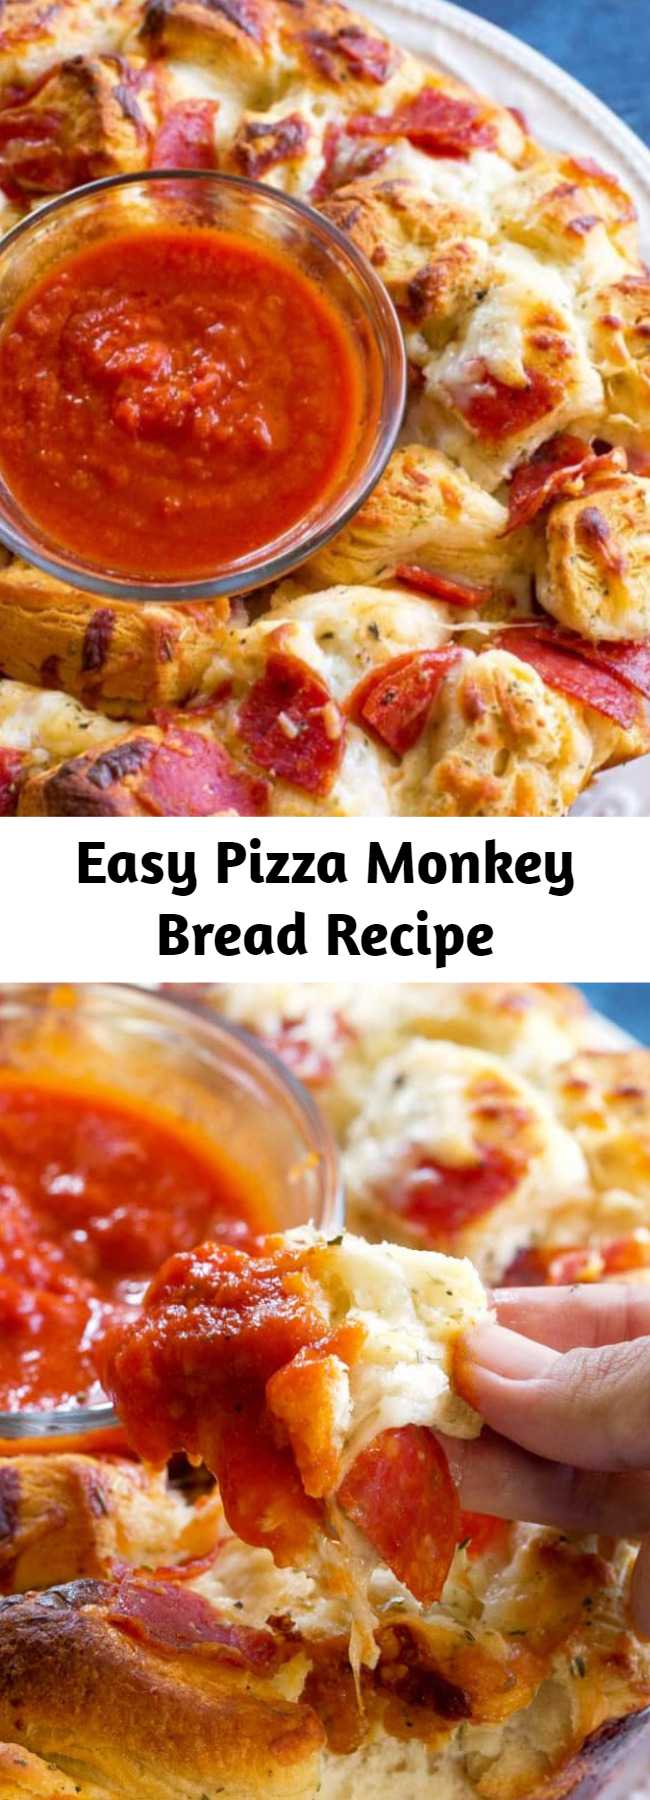 Easy Pizza Monkey Bread Recipe - Pizza Monkey Bread is an Italian appetizer stuffed with pepperoni, mozzarella cheese, and garlic all in a Bundt pan.  If you love pizza, you’ll love this Pizza Monkey Bread made with biscuits and marinara sauce for dipping.